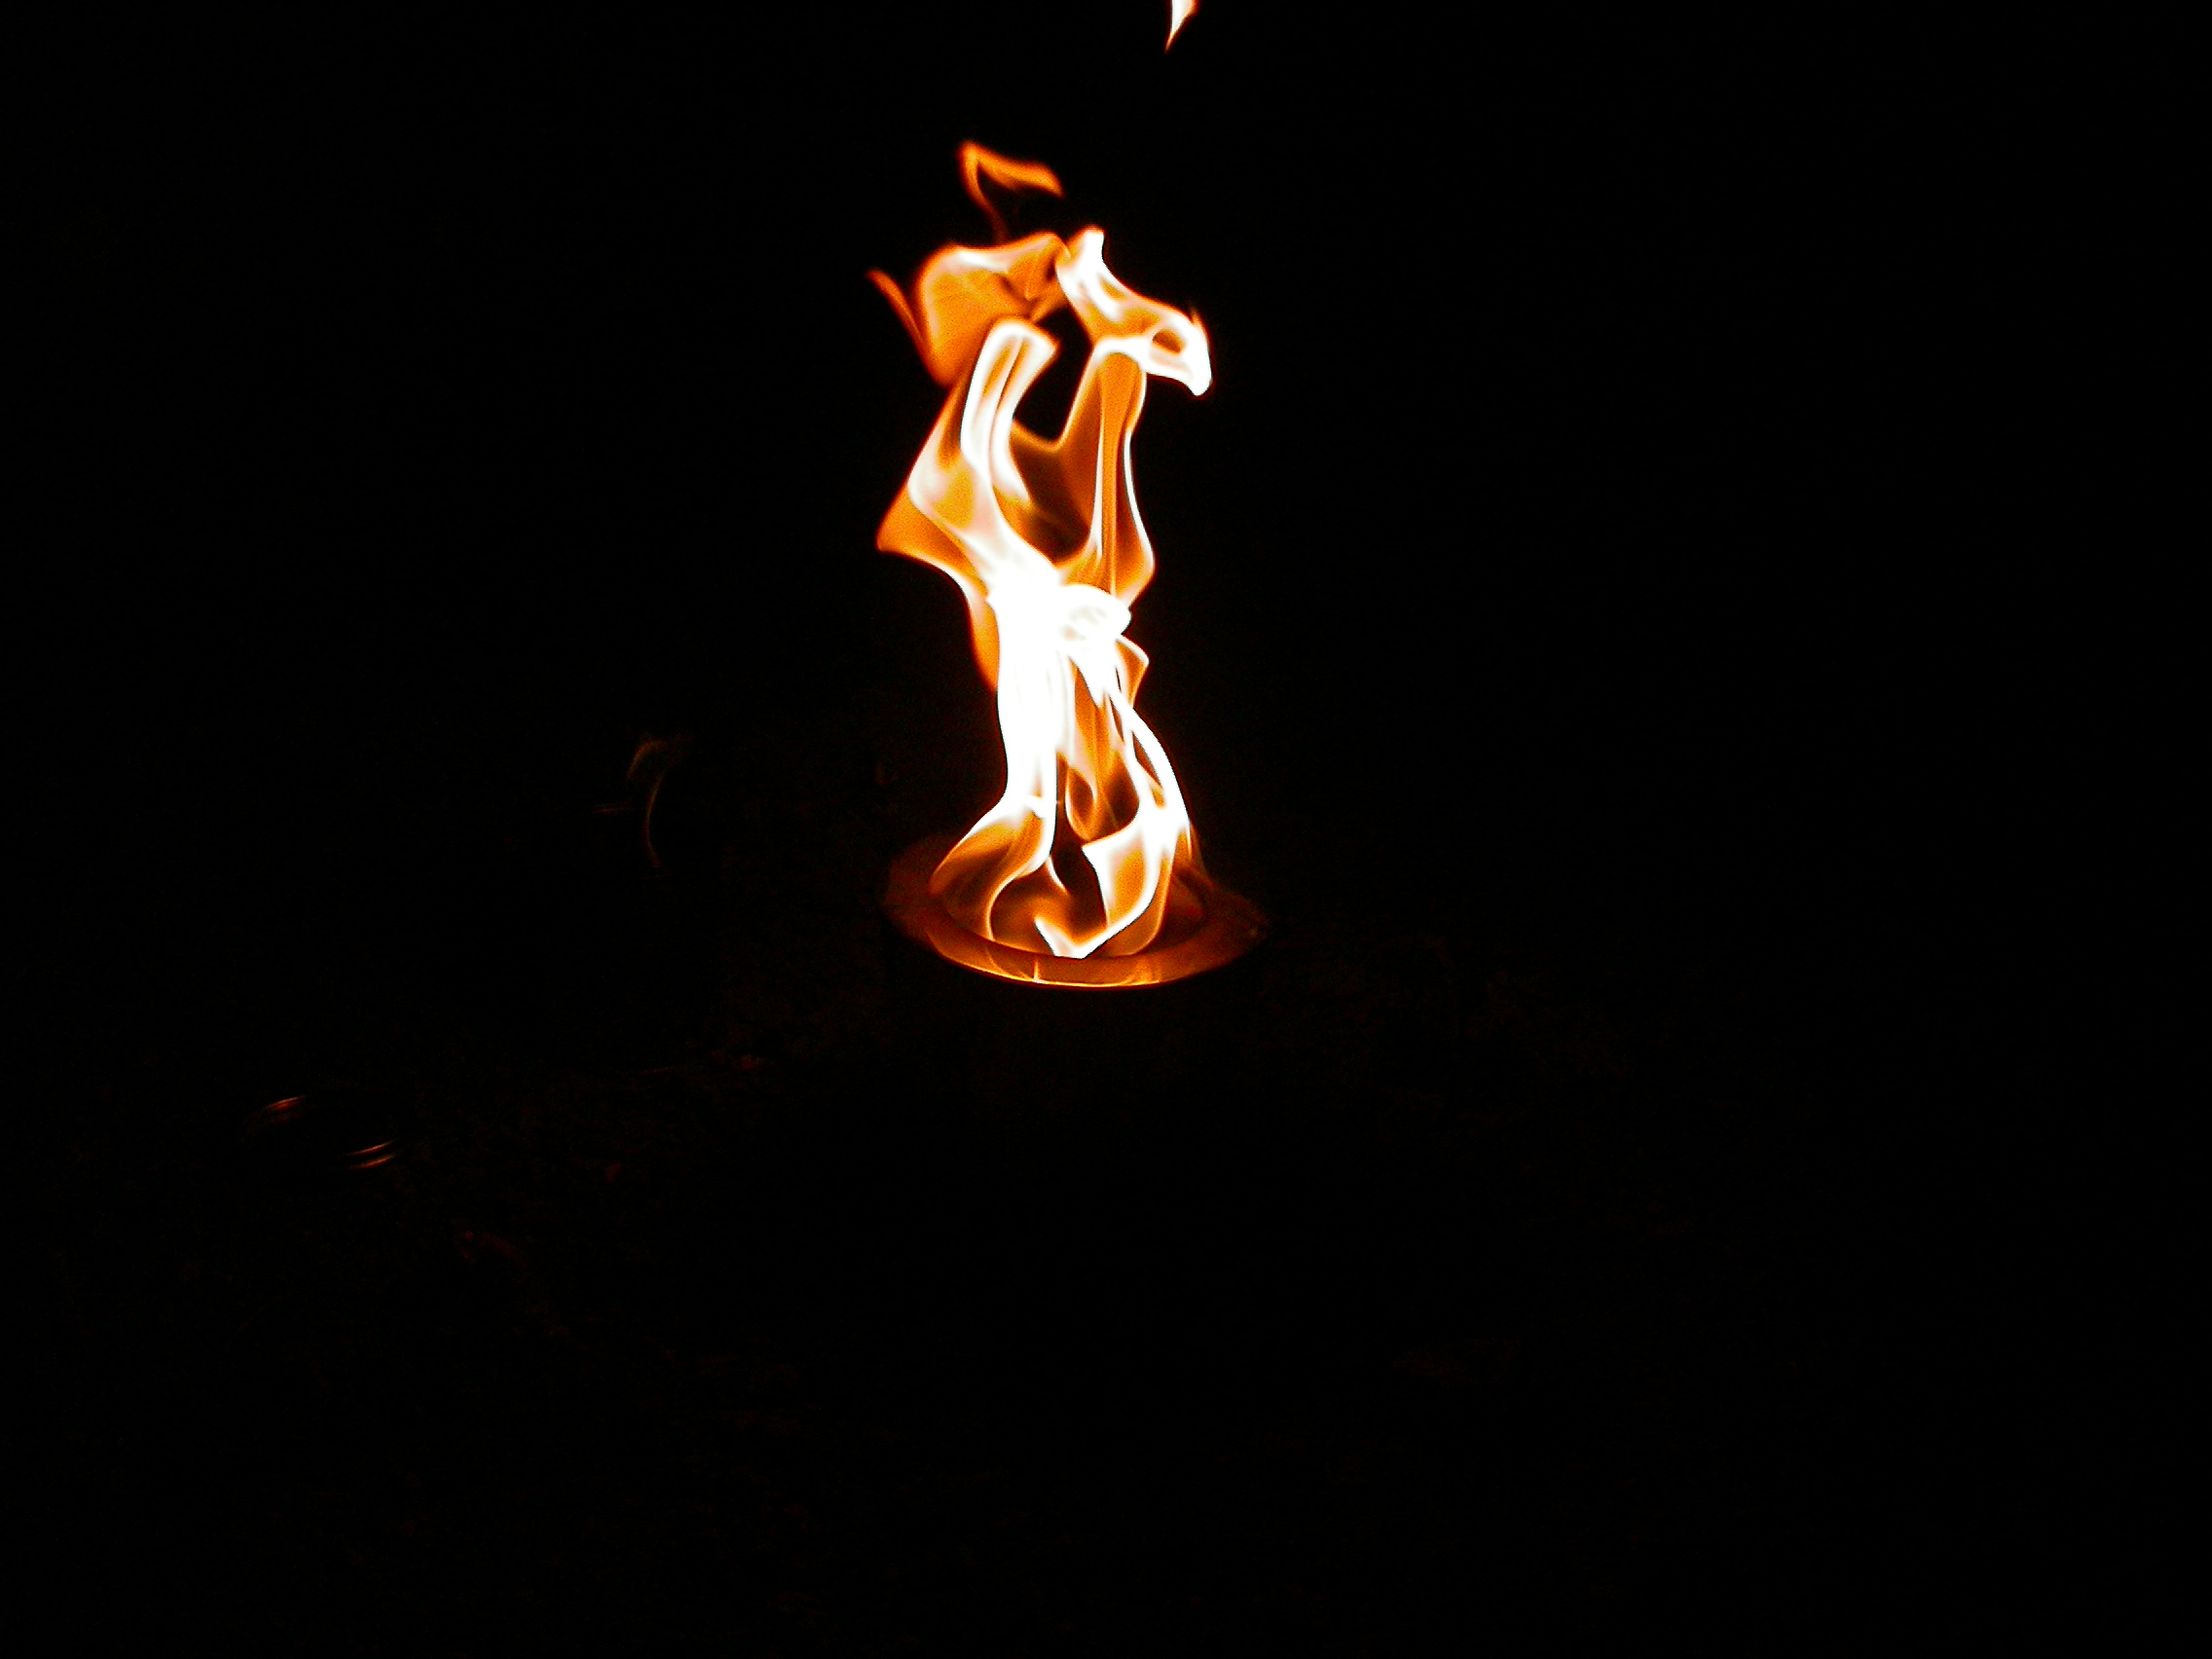 paul fire flame nature elements burning